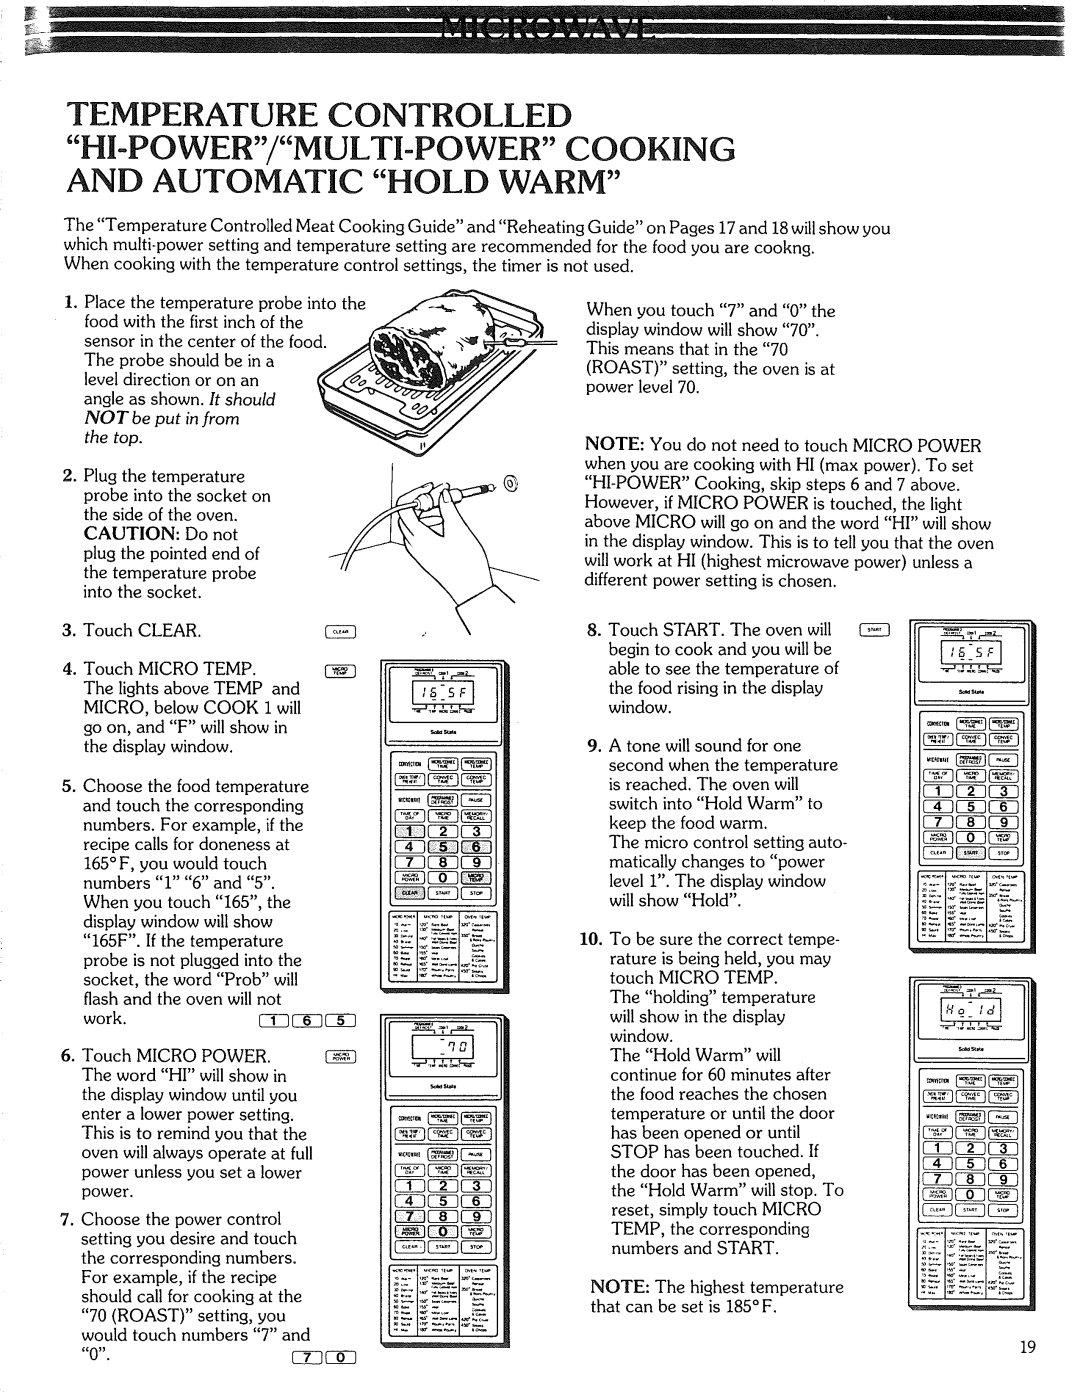 Kenmore 87561 manual Temperature Controlled, CAUTION: Do not 